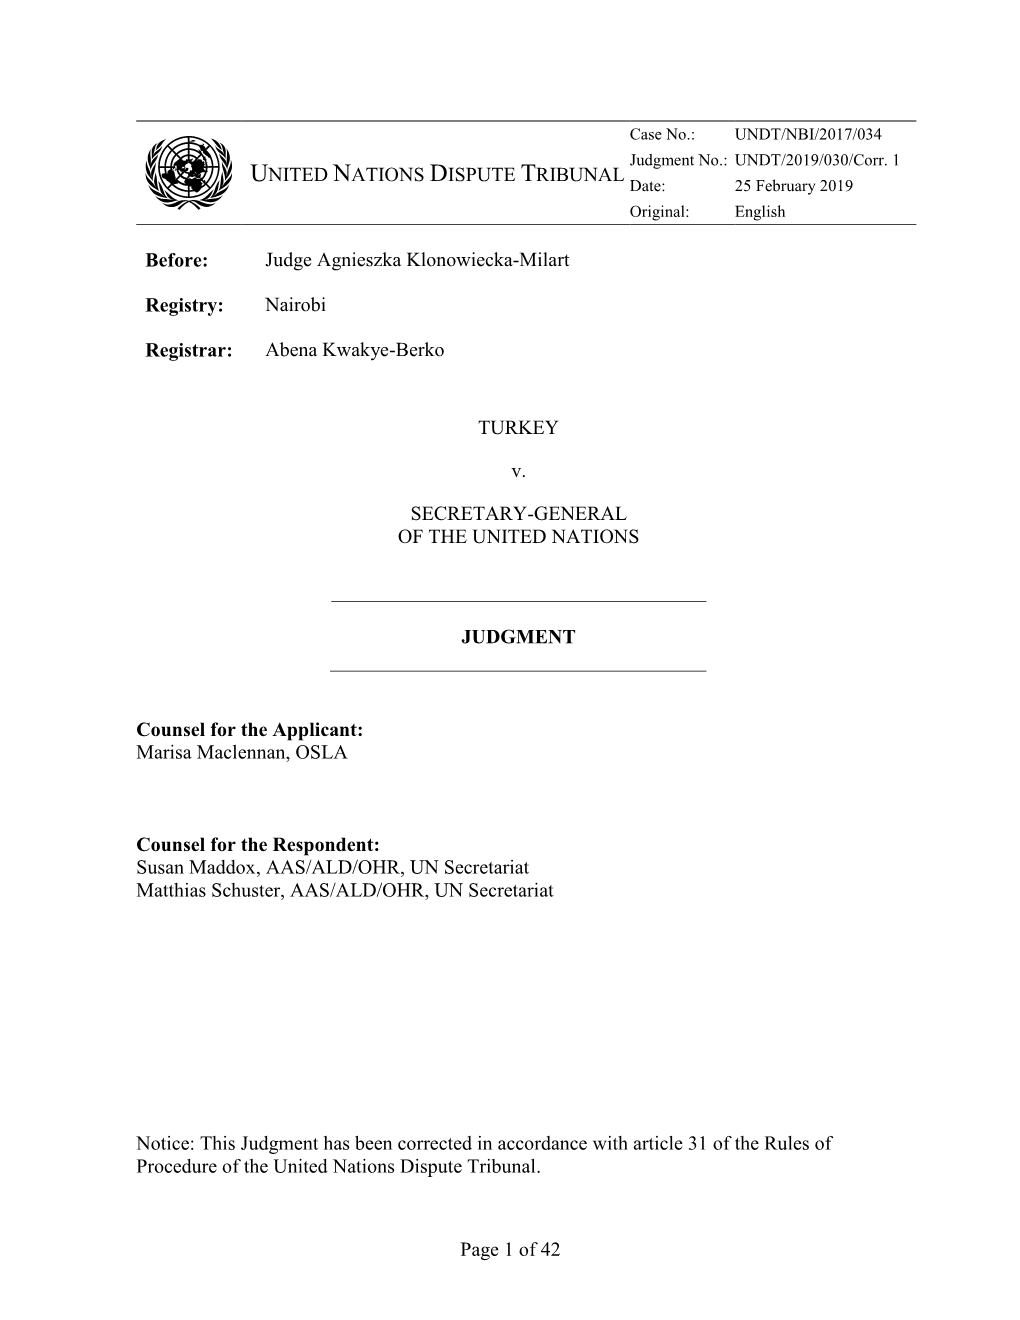 Page 1 of 42 UNITED NATIONS DISPUTE TRIBUNAL Before